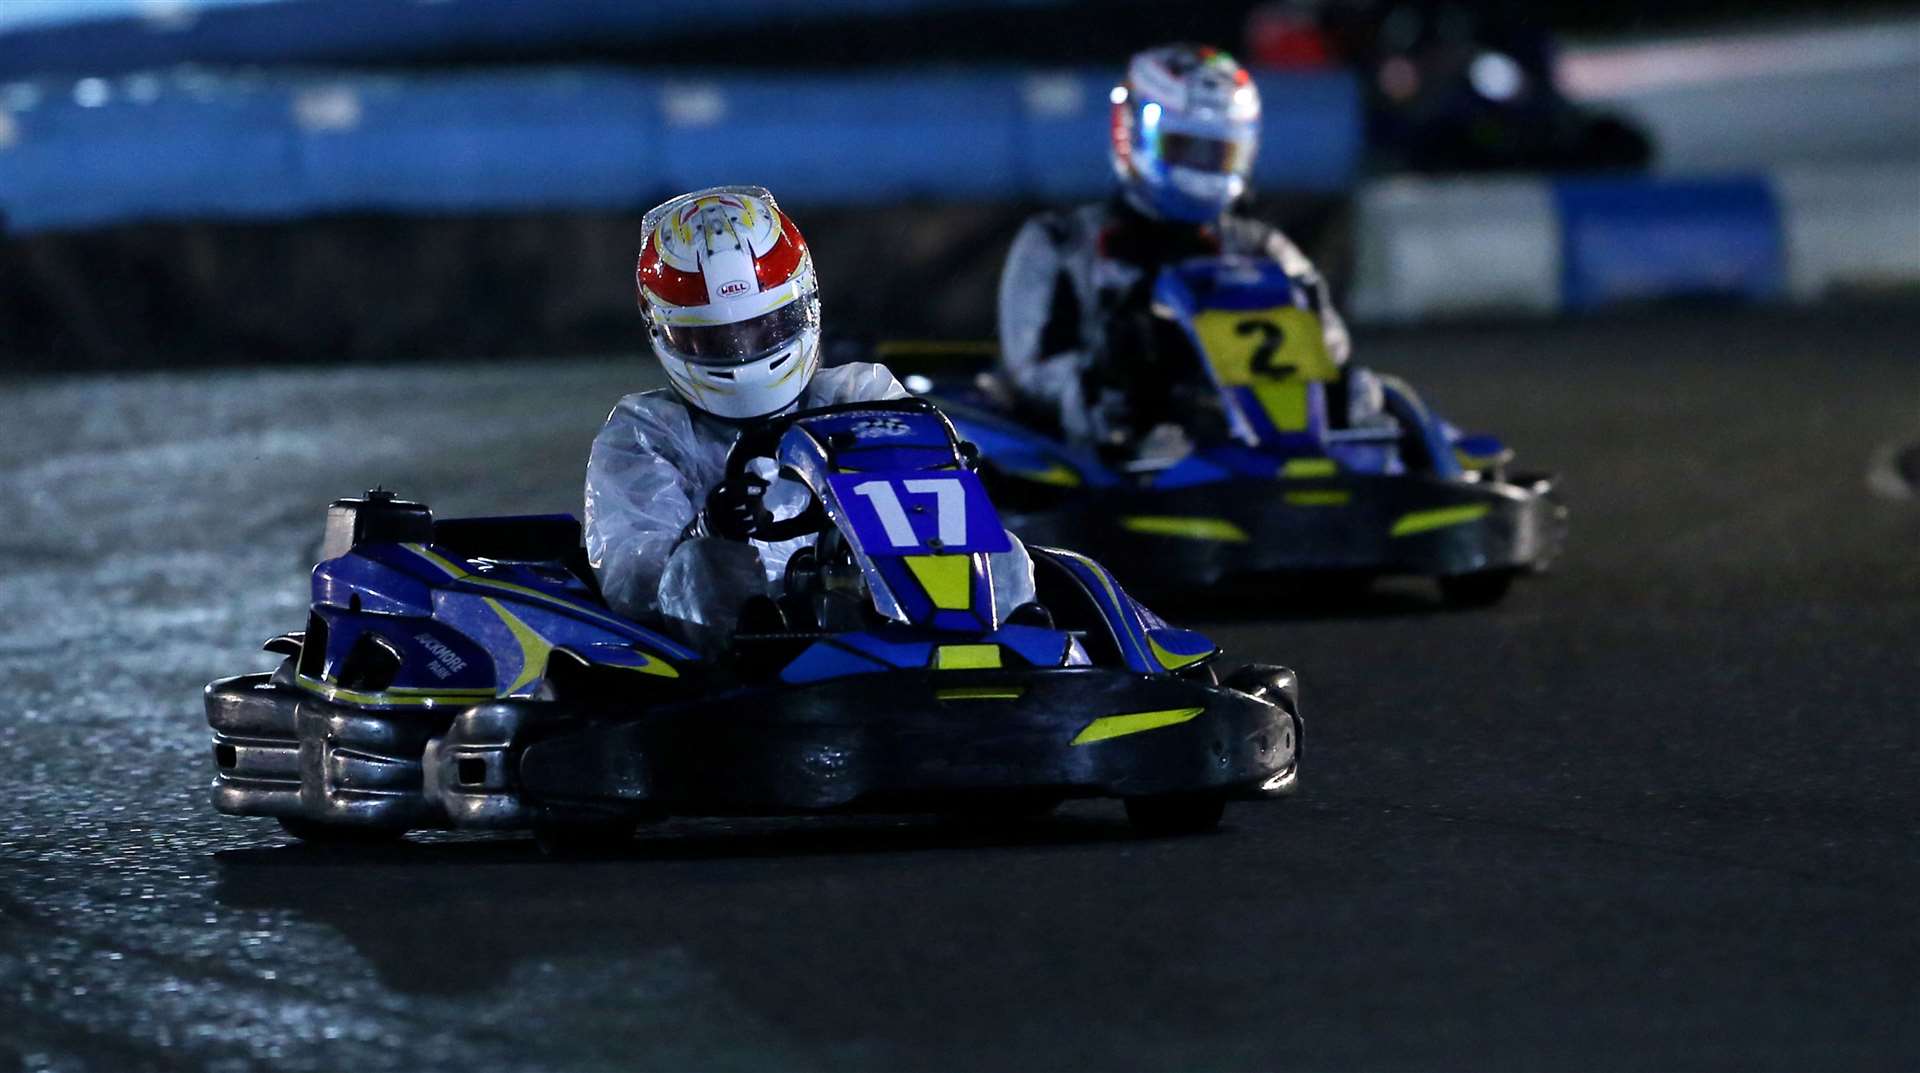 Win a night-time racing experience at Buckmore Park in Chatham. Picture: Buckmore Park